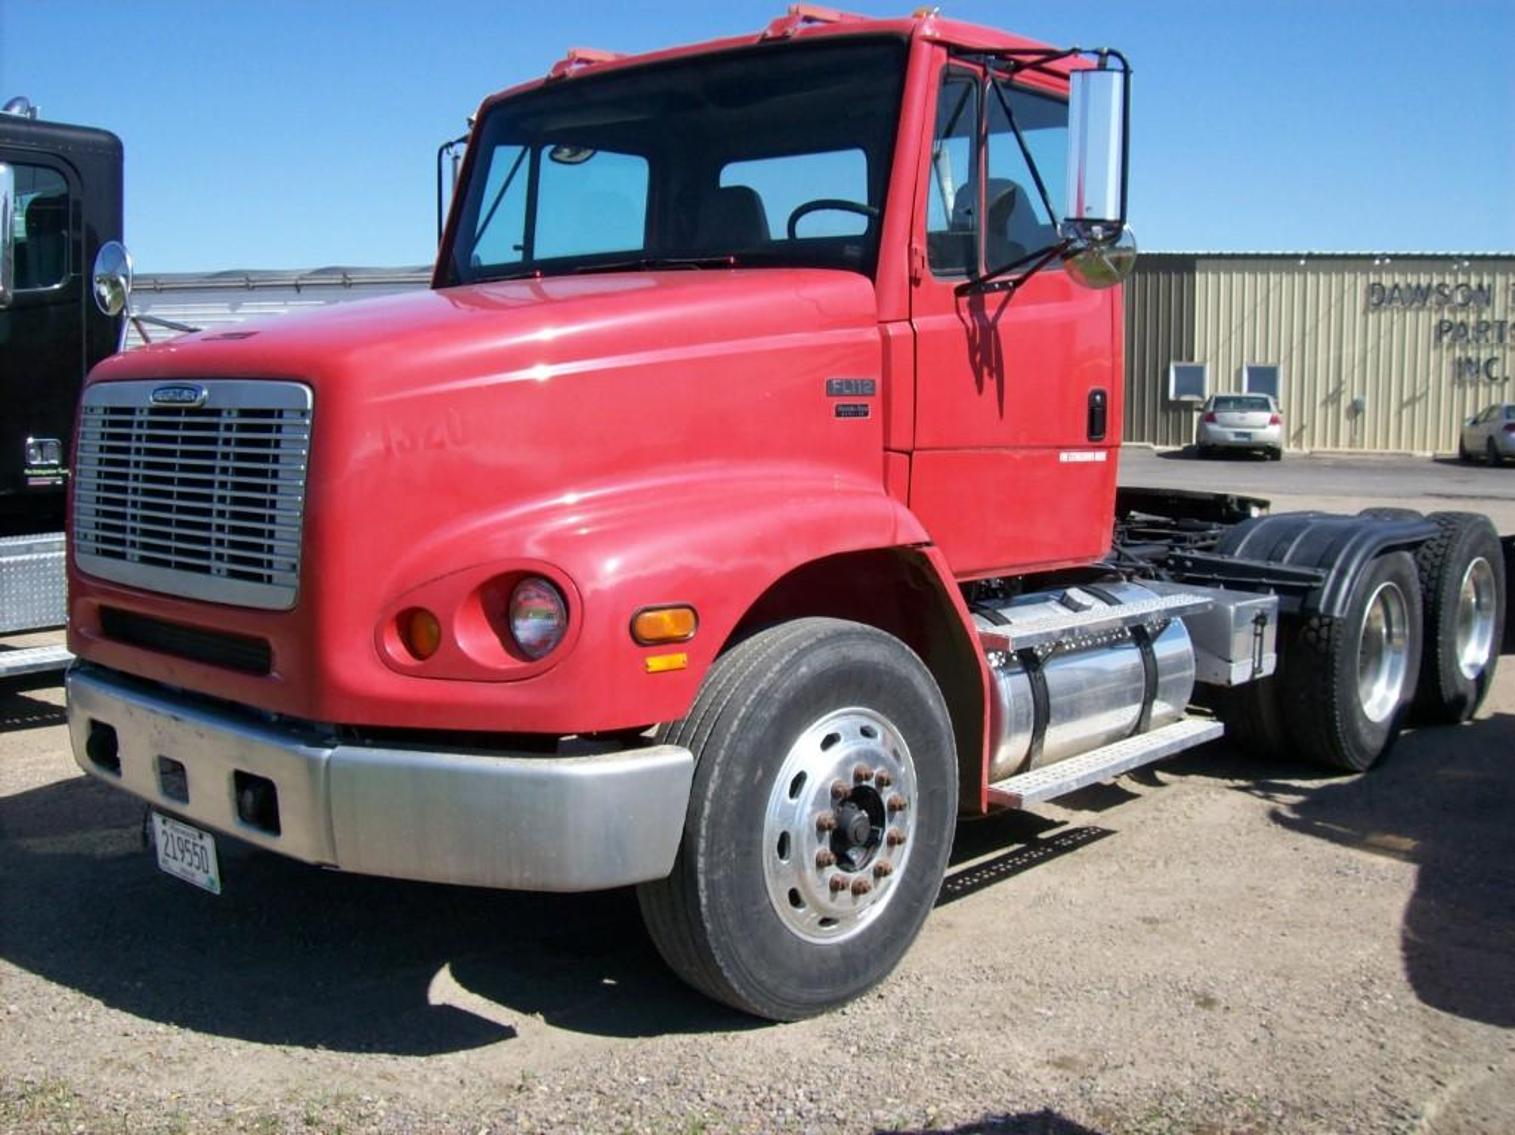 Dawson Truck Parts Excess Equipment: Trucks, Trailers, Pickups and More